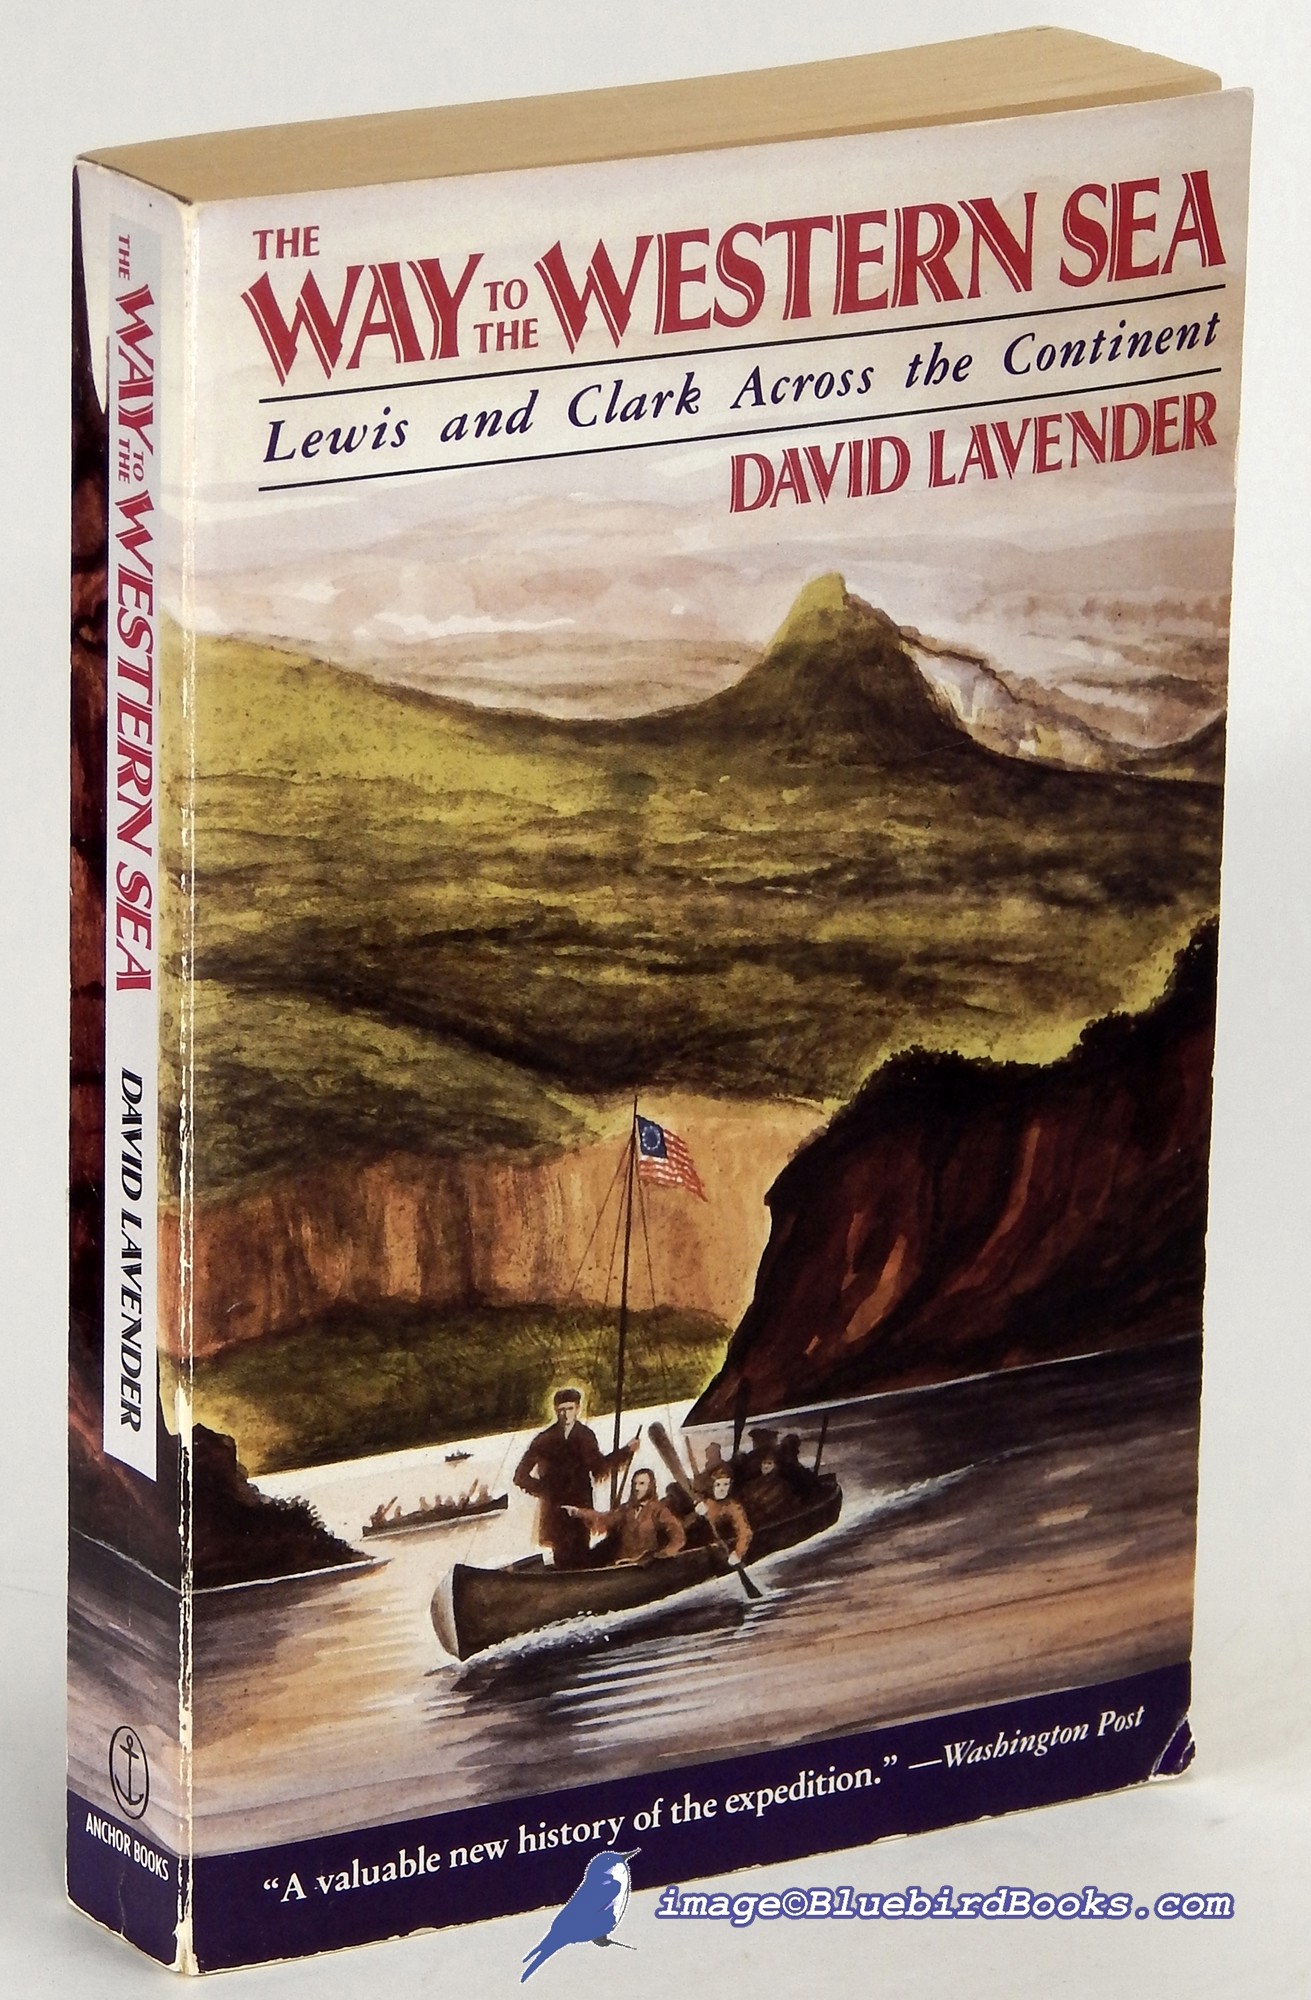 LAVENDER, DAVID - The Way to the Western Sea: Lewis and Clark Across the Continent